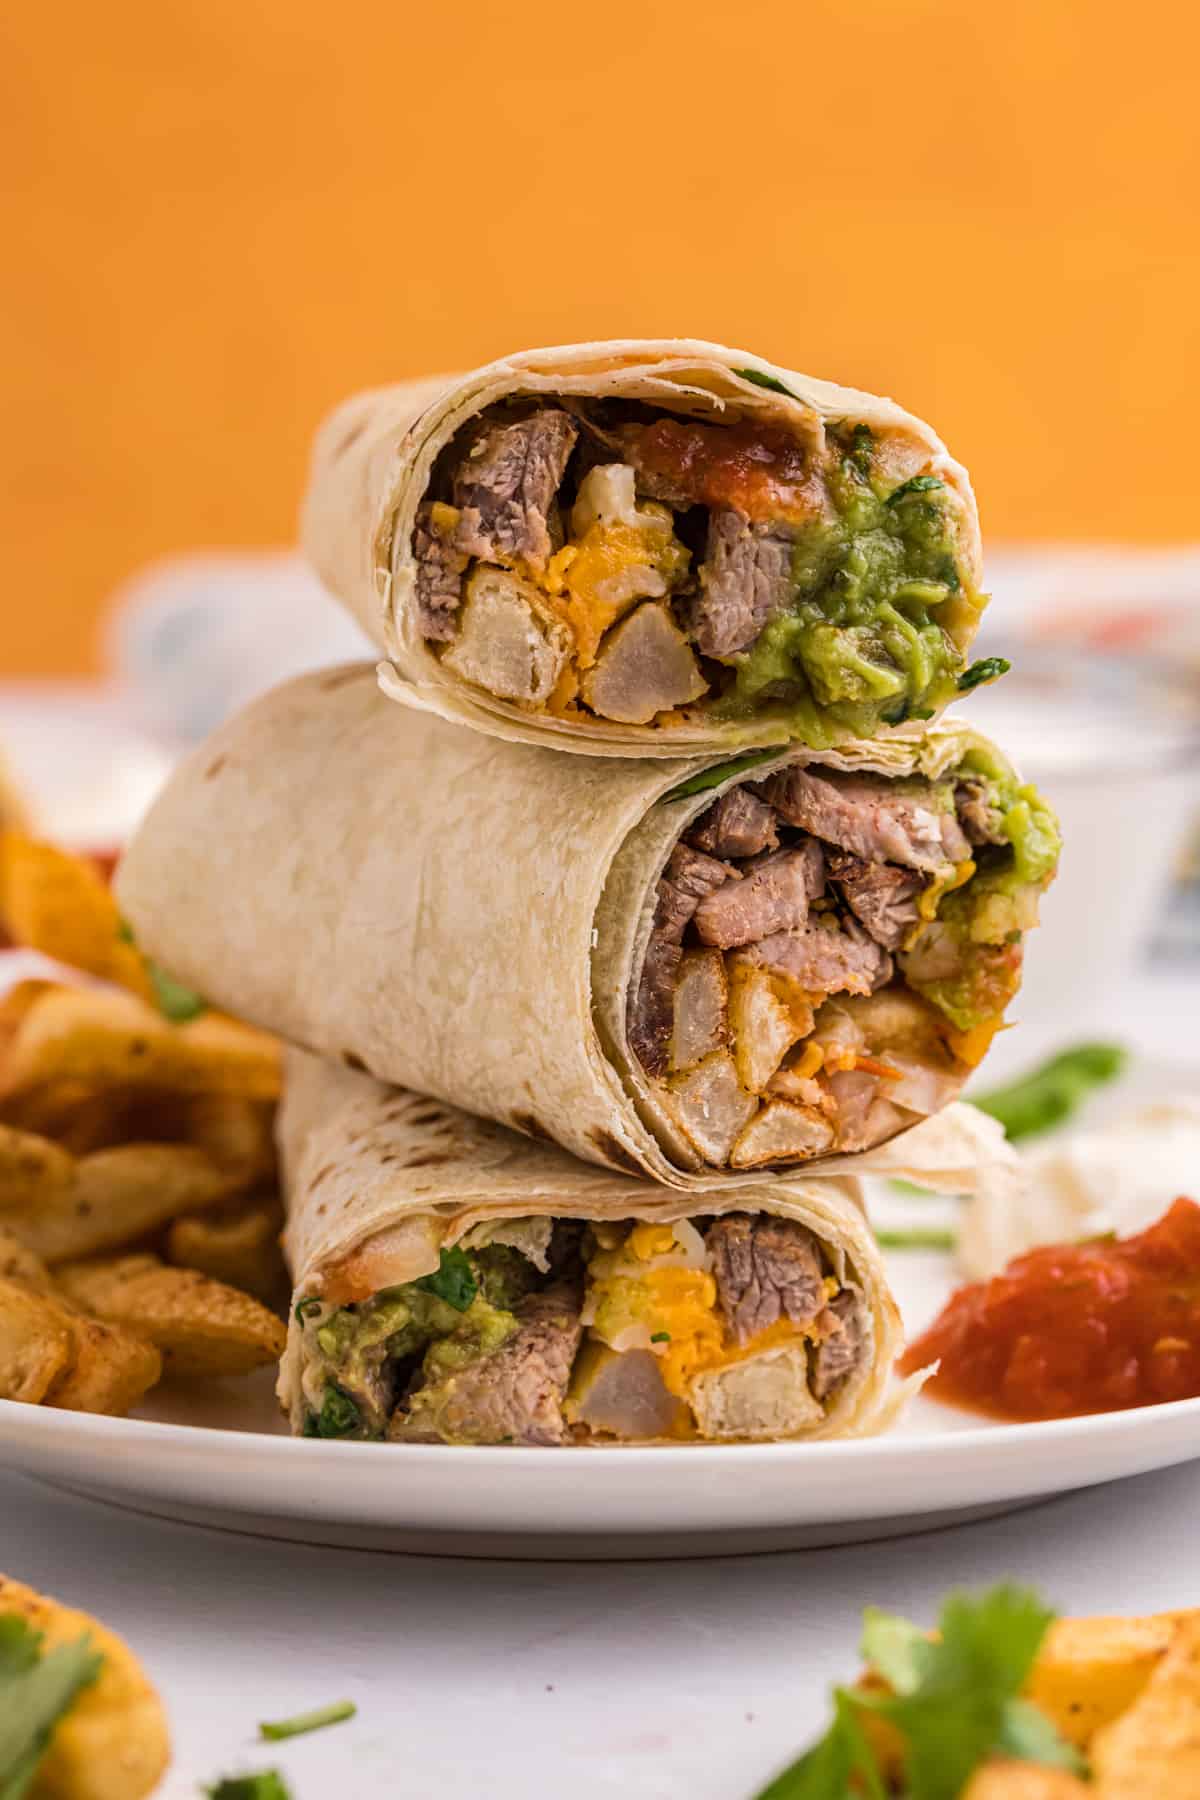 A California burrito is sliced and plated on a white plate.